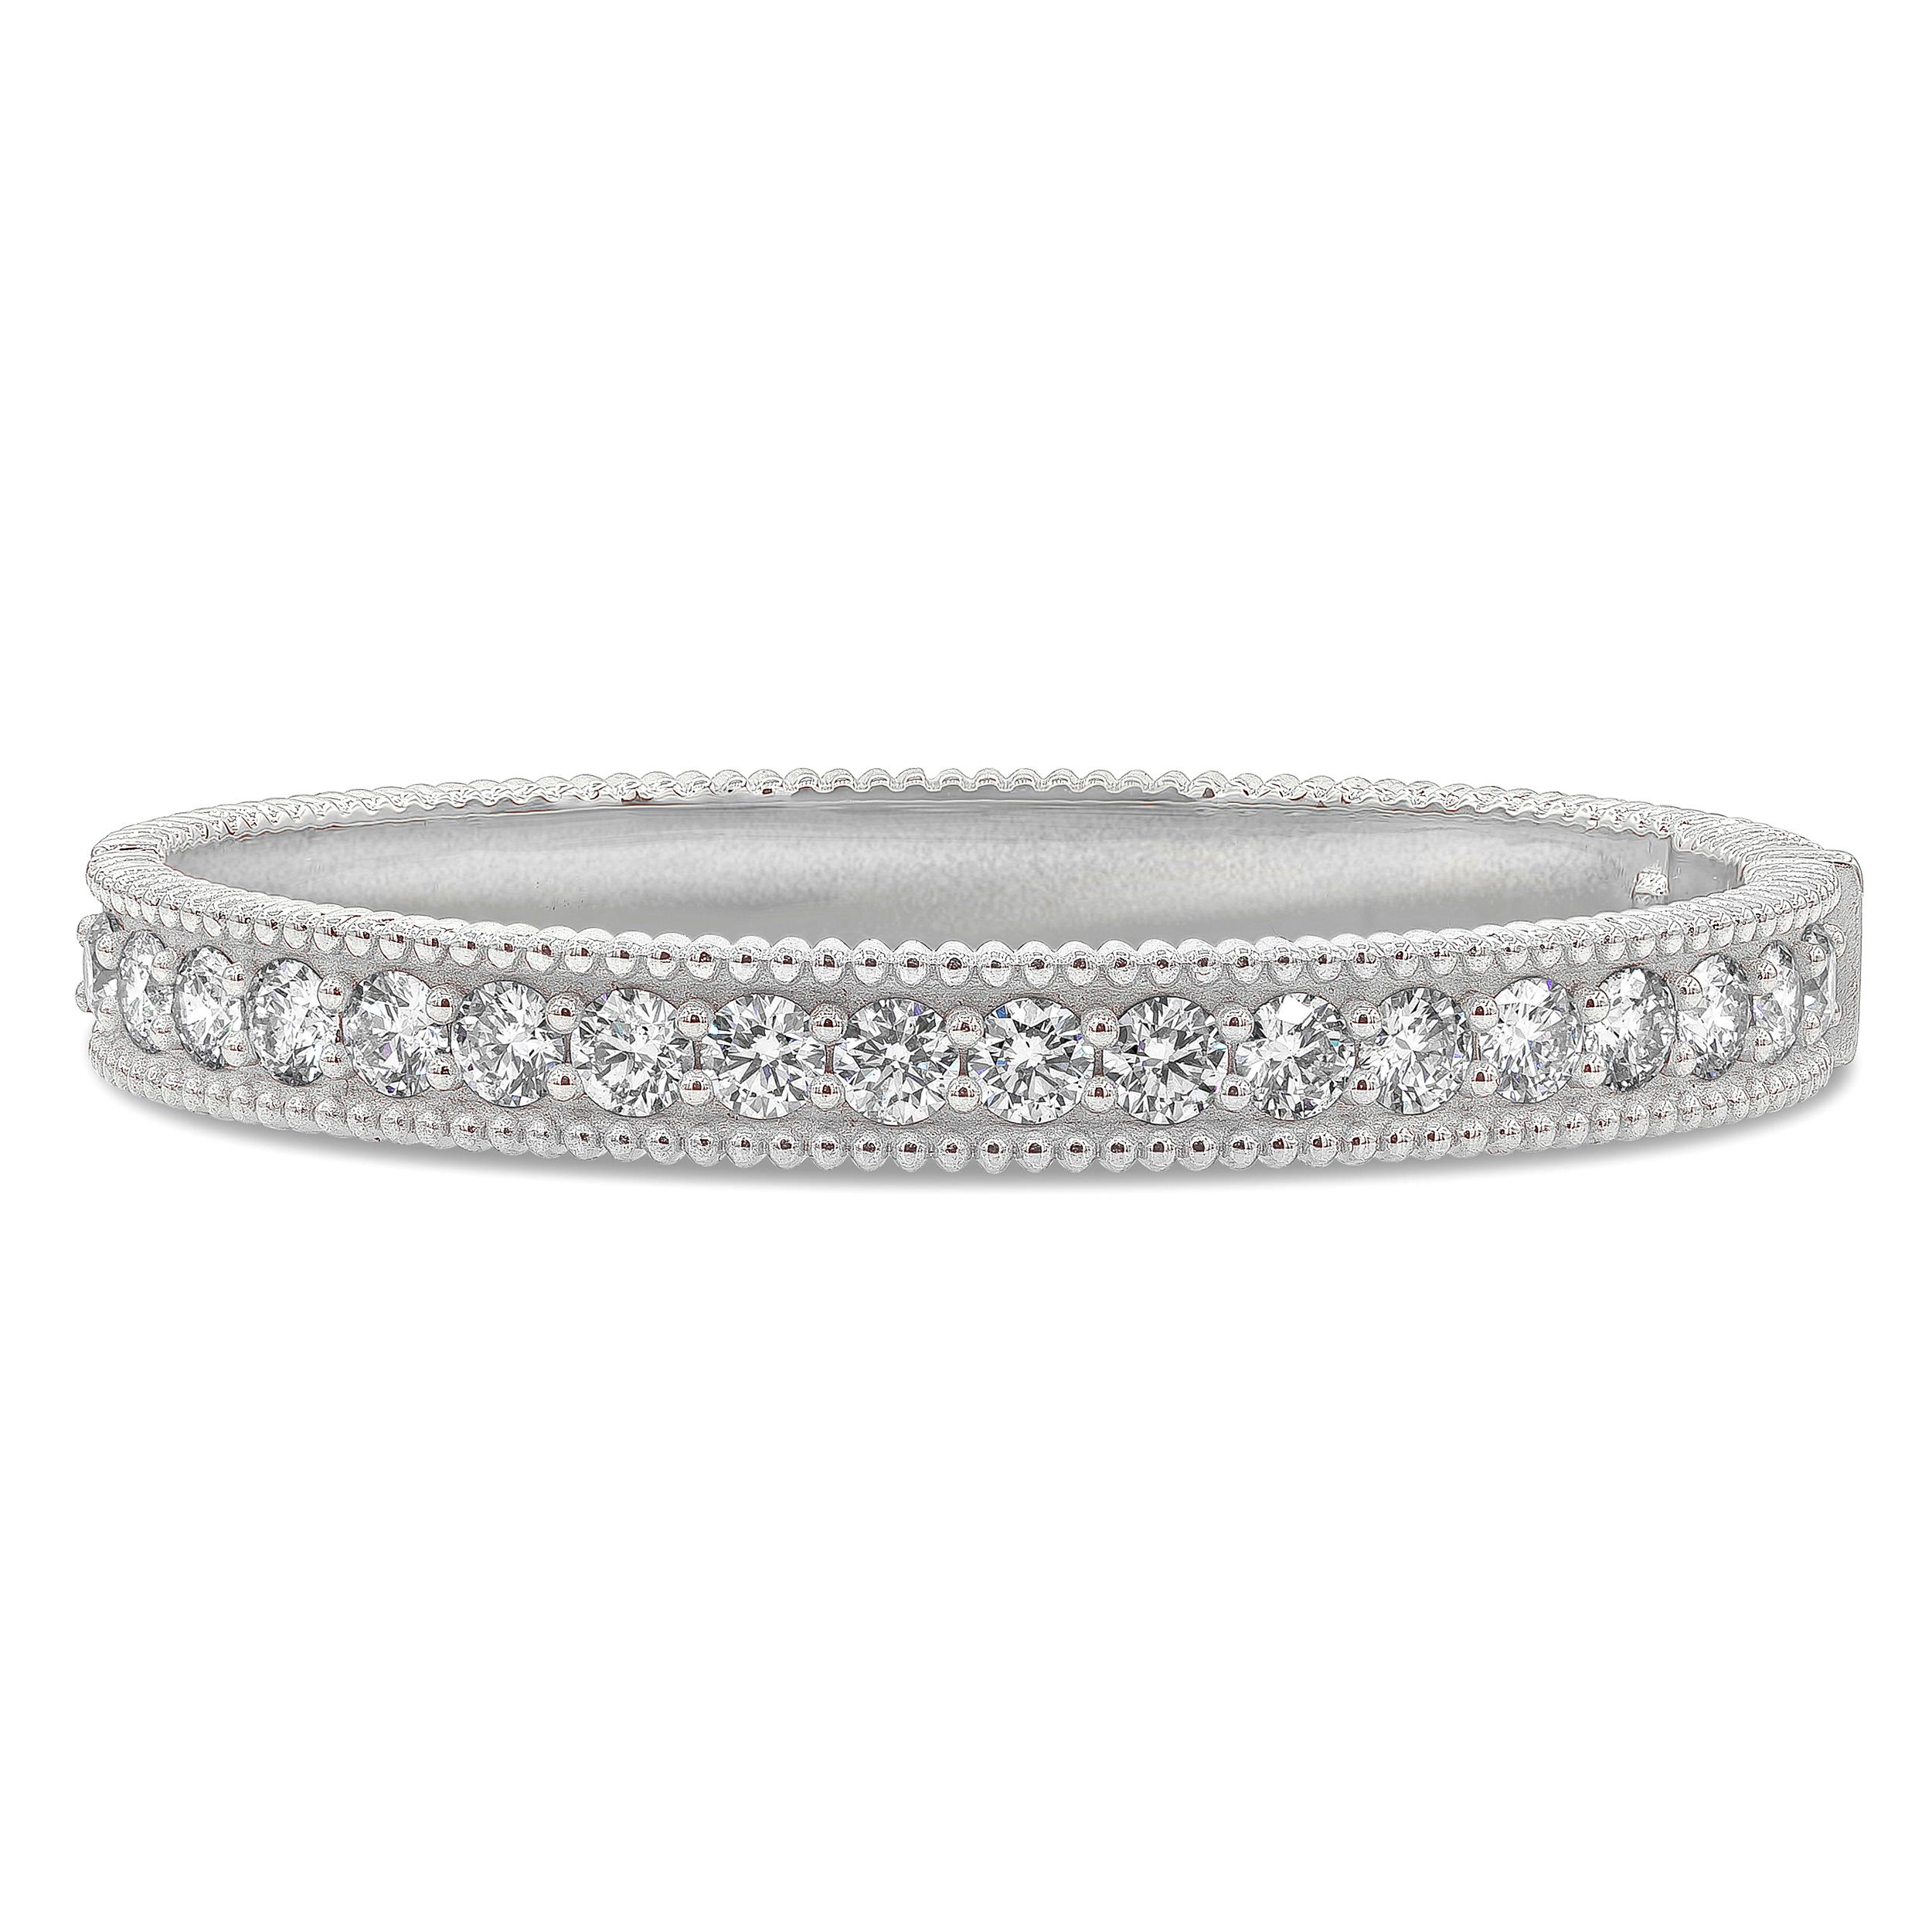 A brilliant and stylish bangle bracelet showcasing a row of brilliant round diamonds weighing 5.49 carats total, E-F Color and SI in Clarity. Set in a flushed shared prong setting. Finely made and crafted with beaded edges in 18K White Gold.

Roman